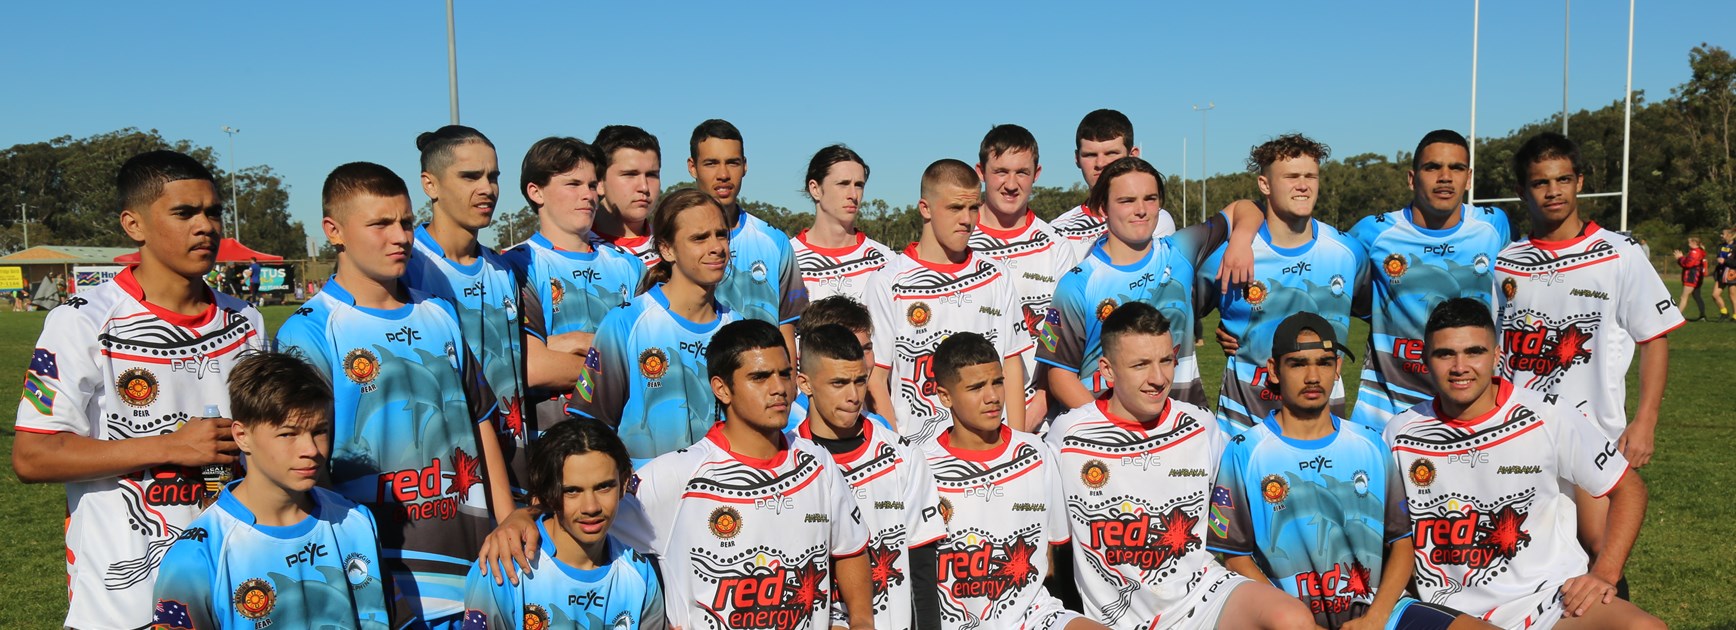 Excitement builds for 2019 PCYC Nations of Origin